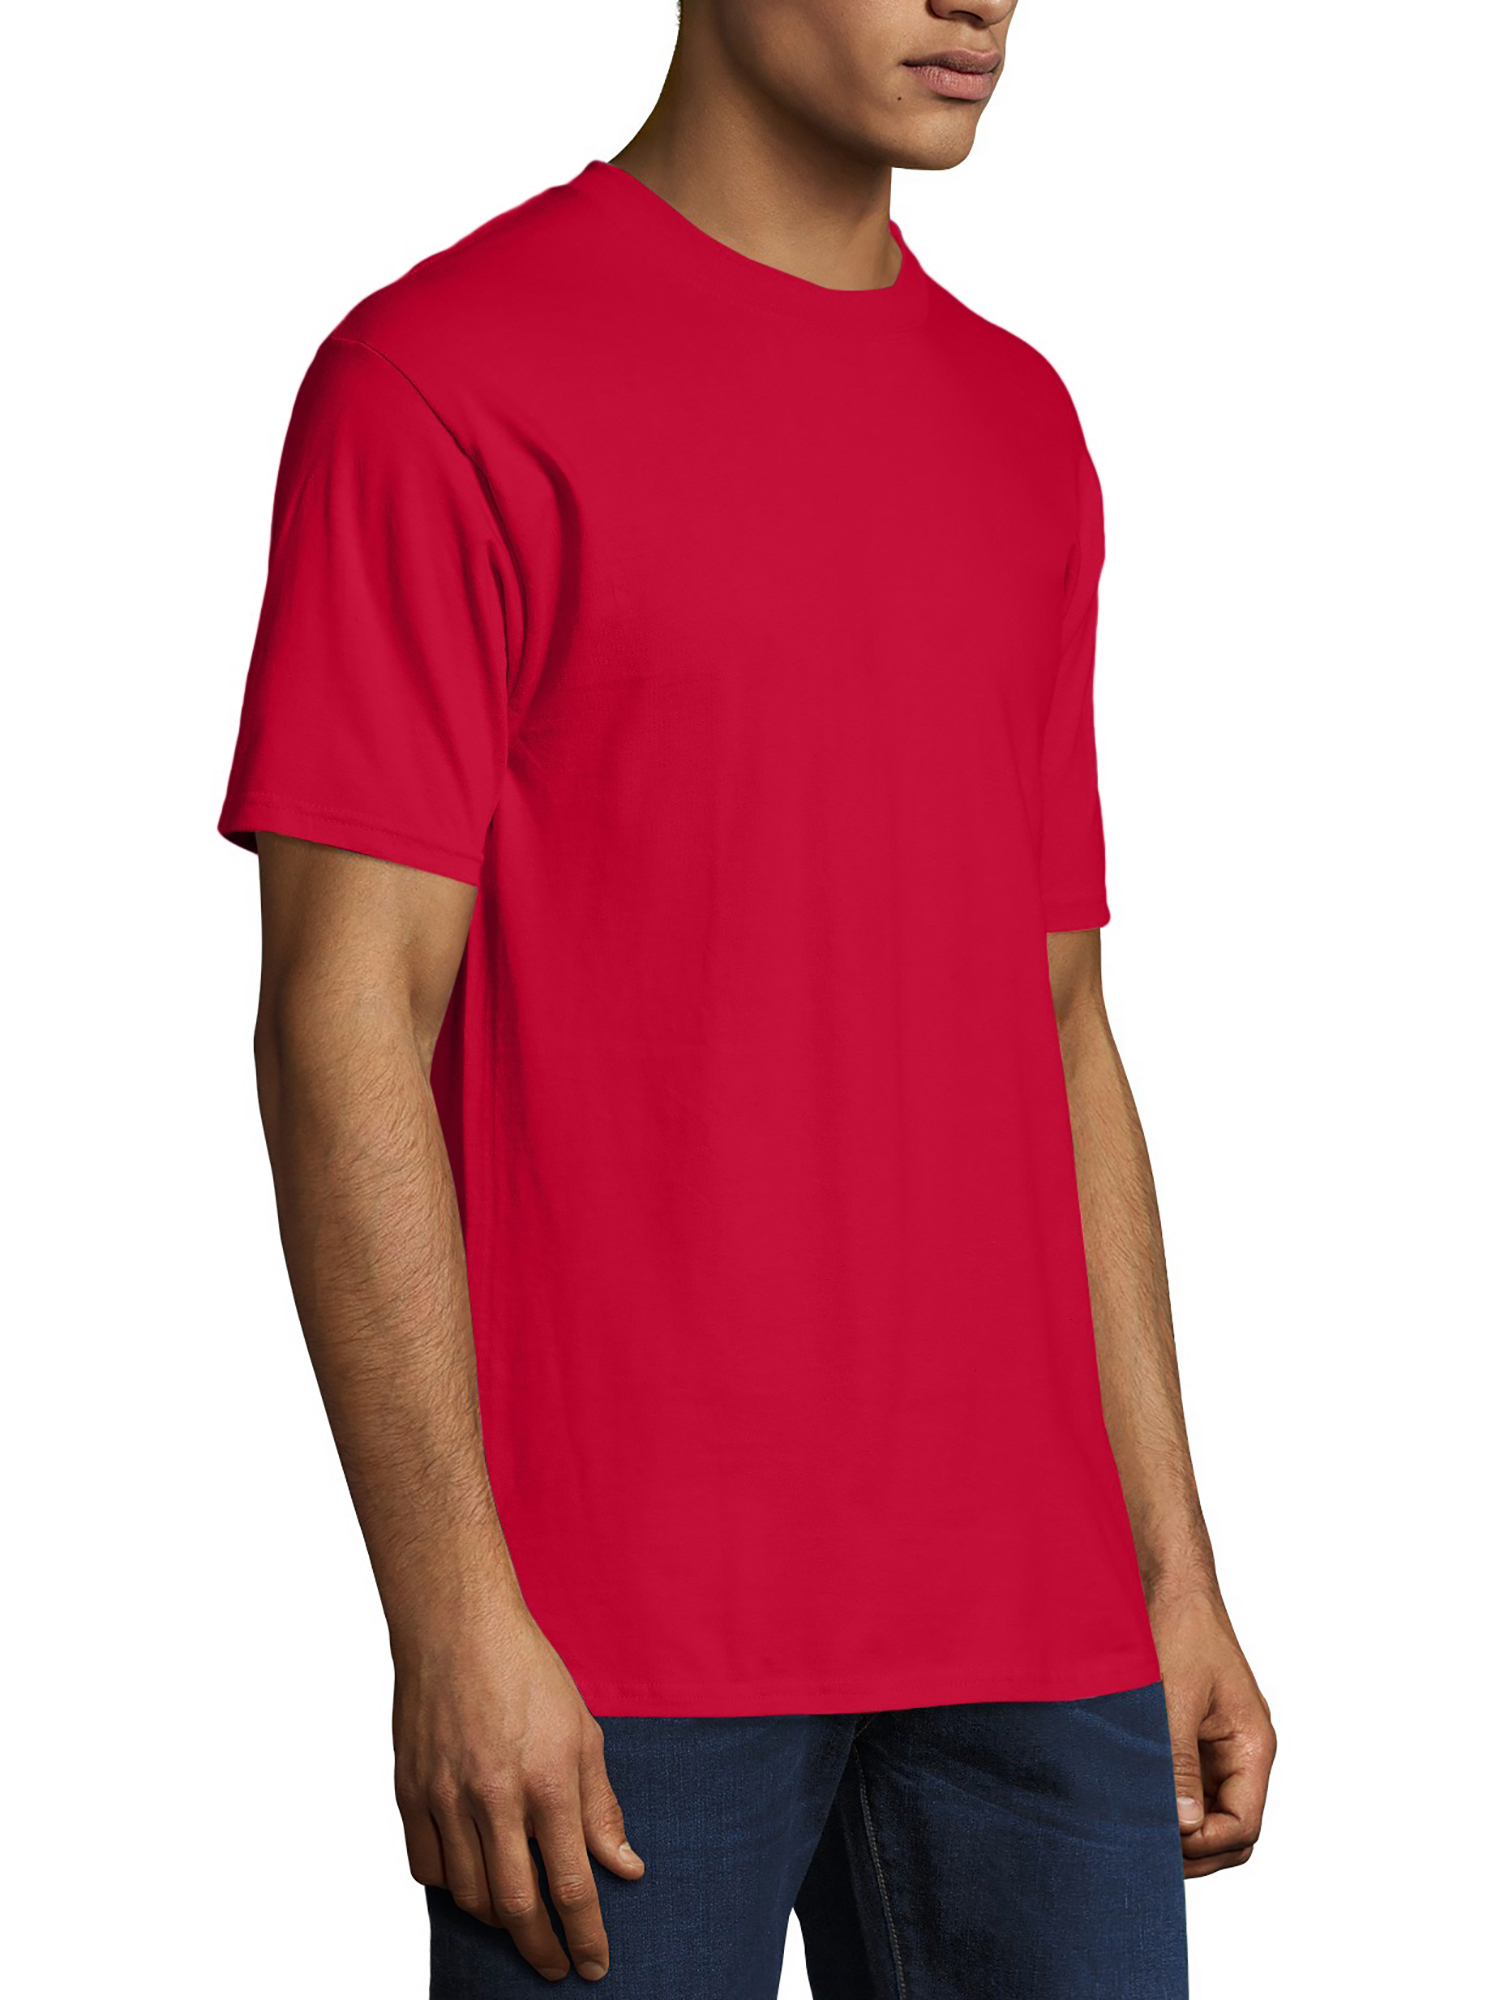 Hanes Big Men's Beefy Heavyweight Short Sleeve T-shirt - Tall Sizes, Up To Size 4XT - image 3 of 7